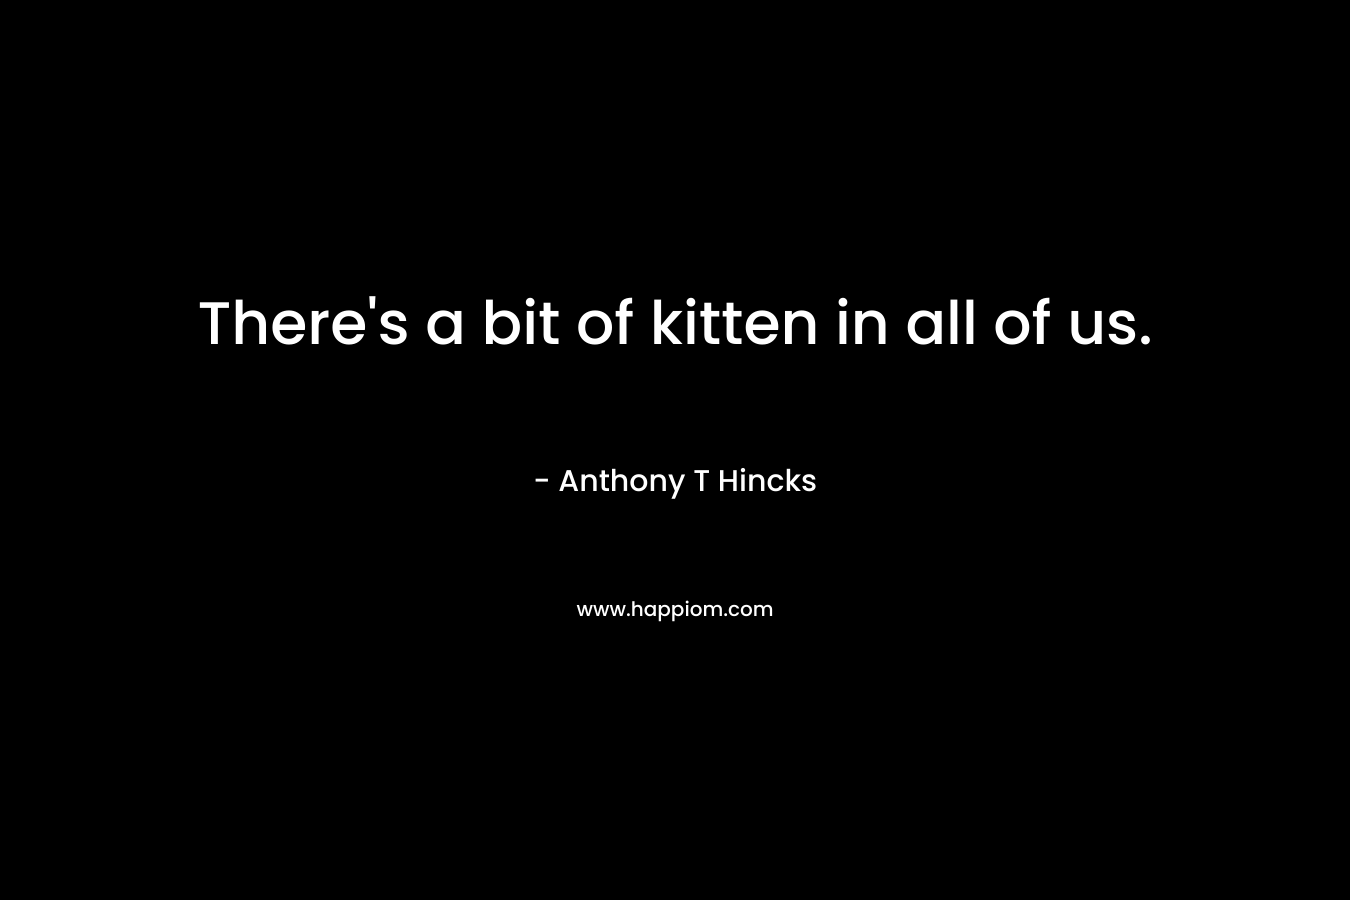 There’s a bit of kitten in all of us. – Anthony T Hincks